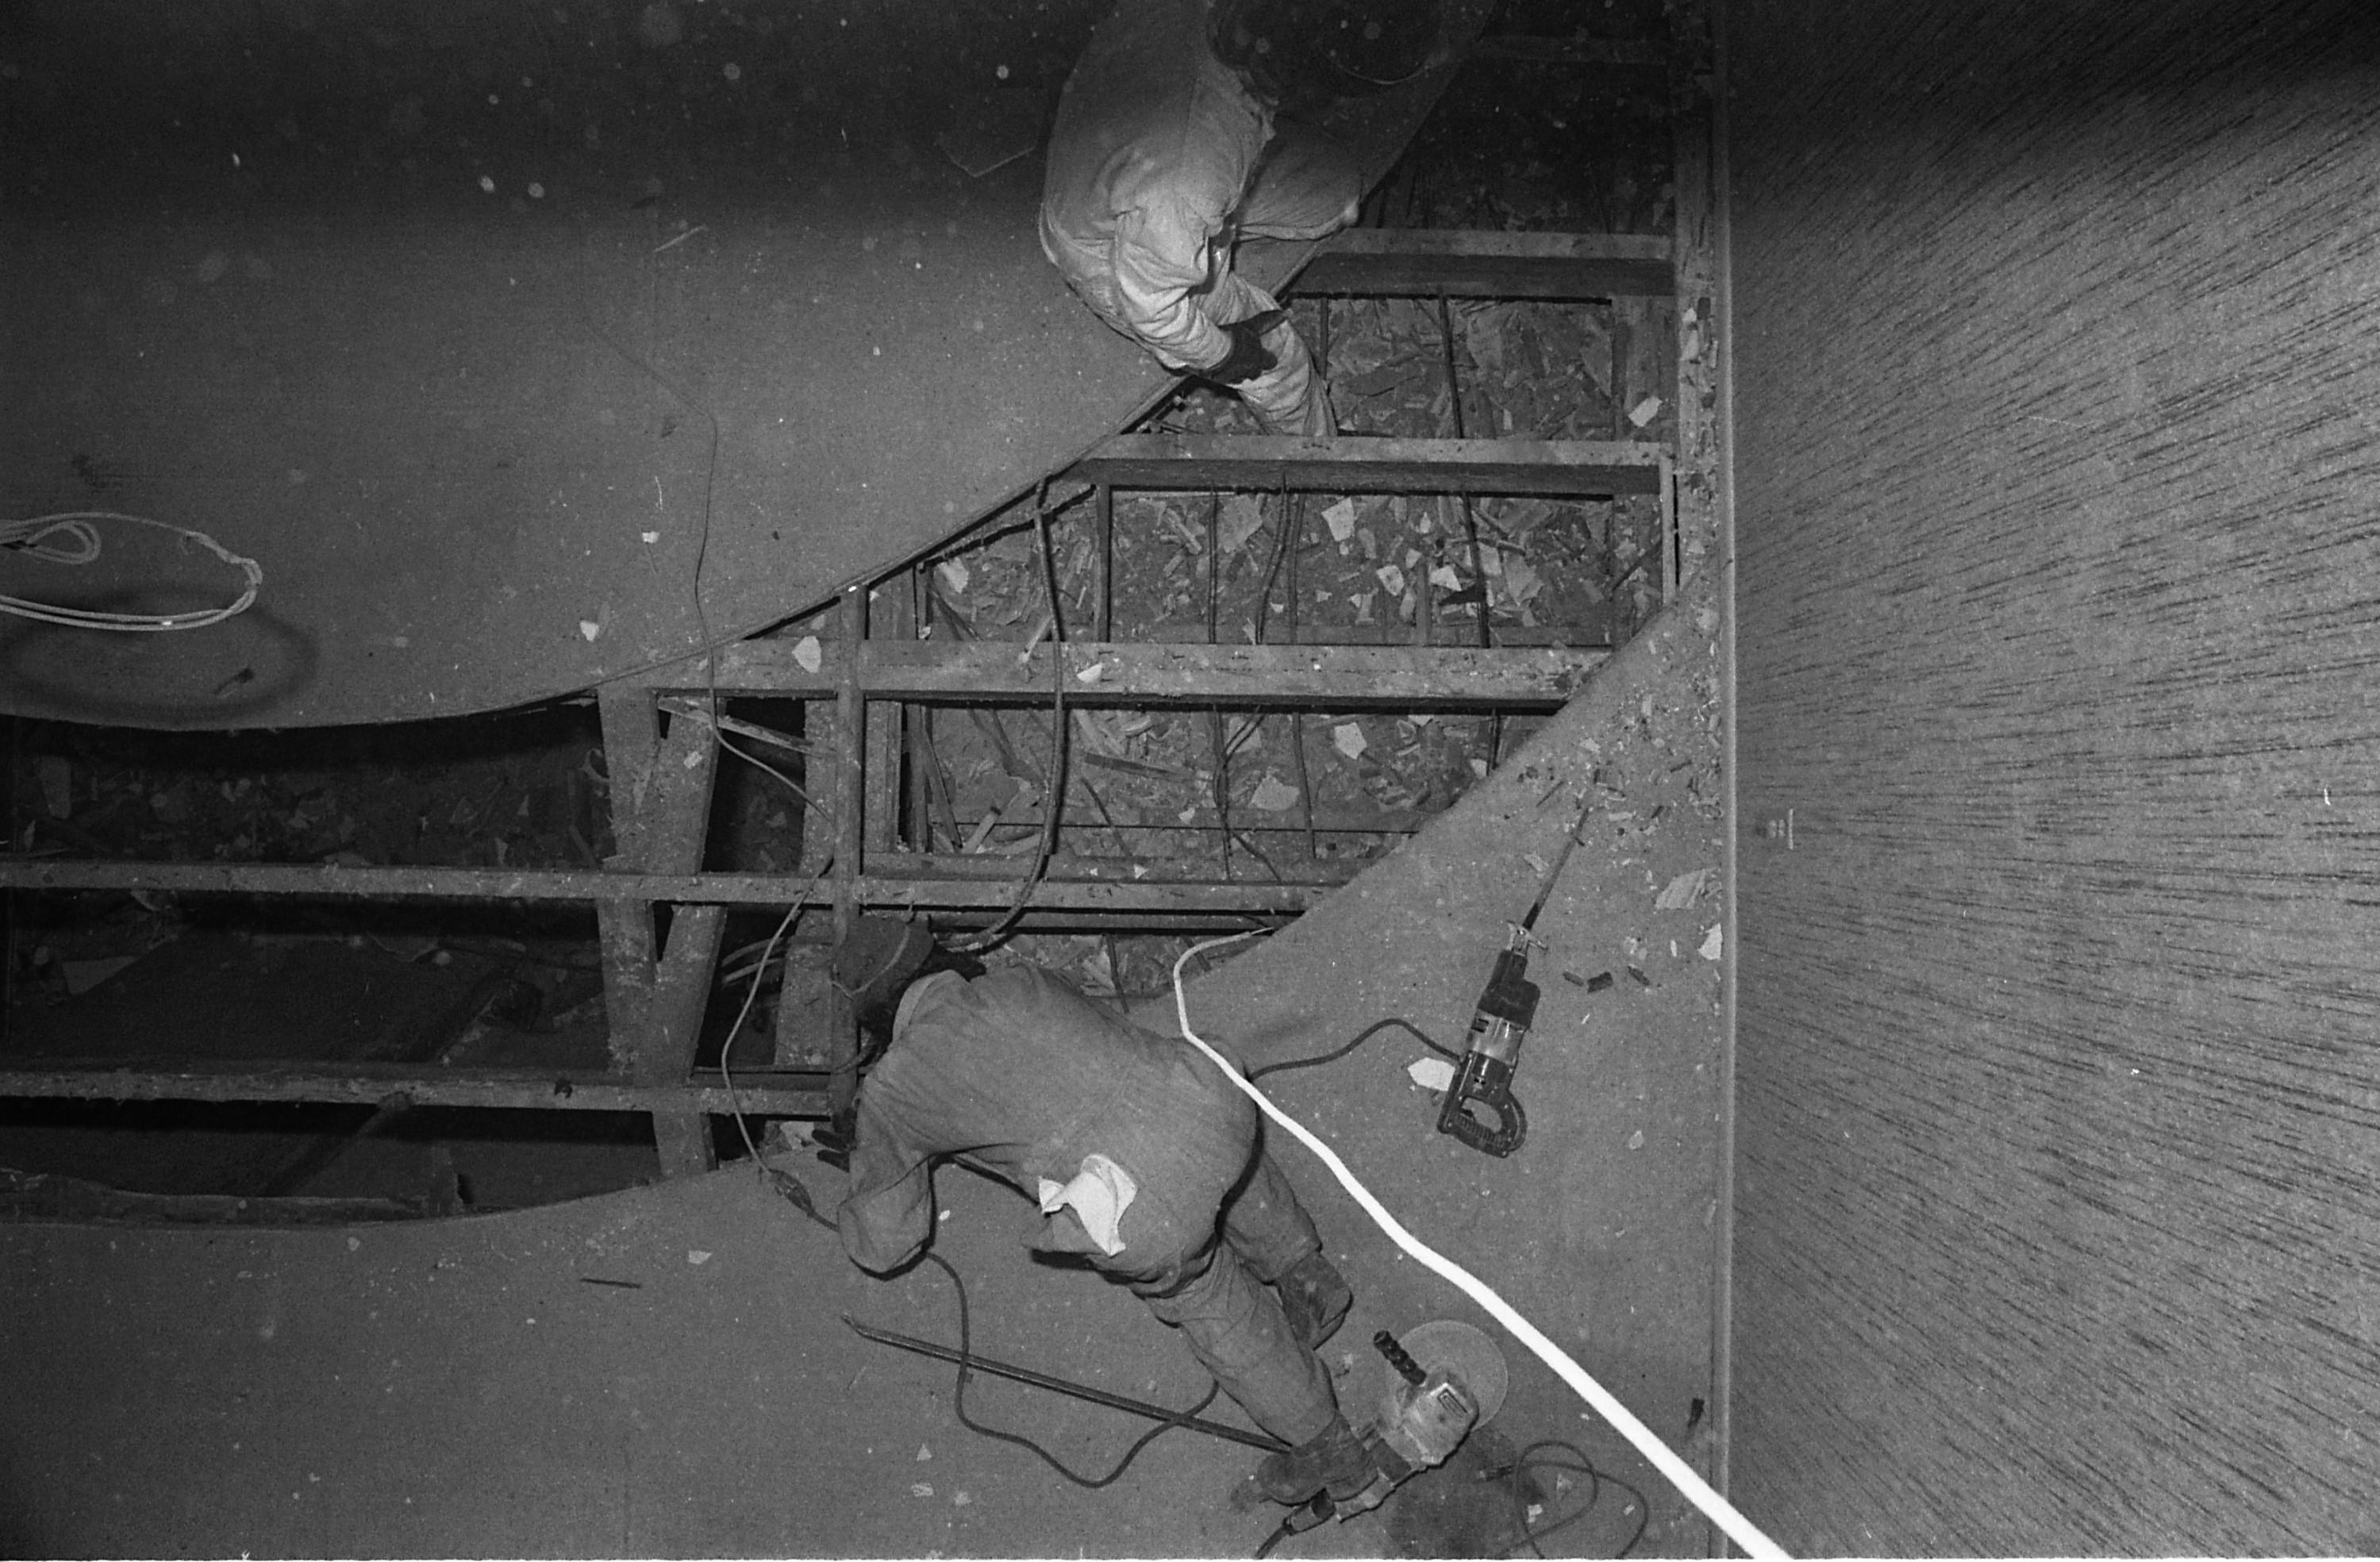 A person in coveralls lays on the ground looking down through a large cut away portion of the building.